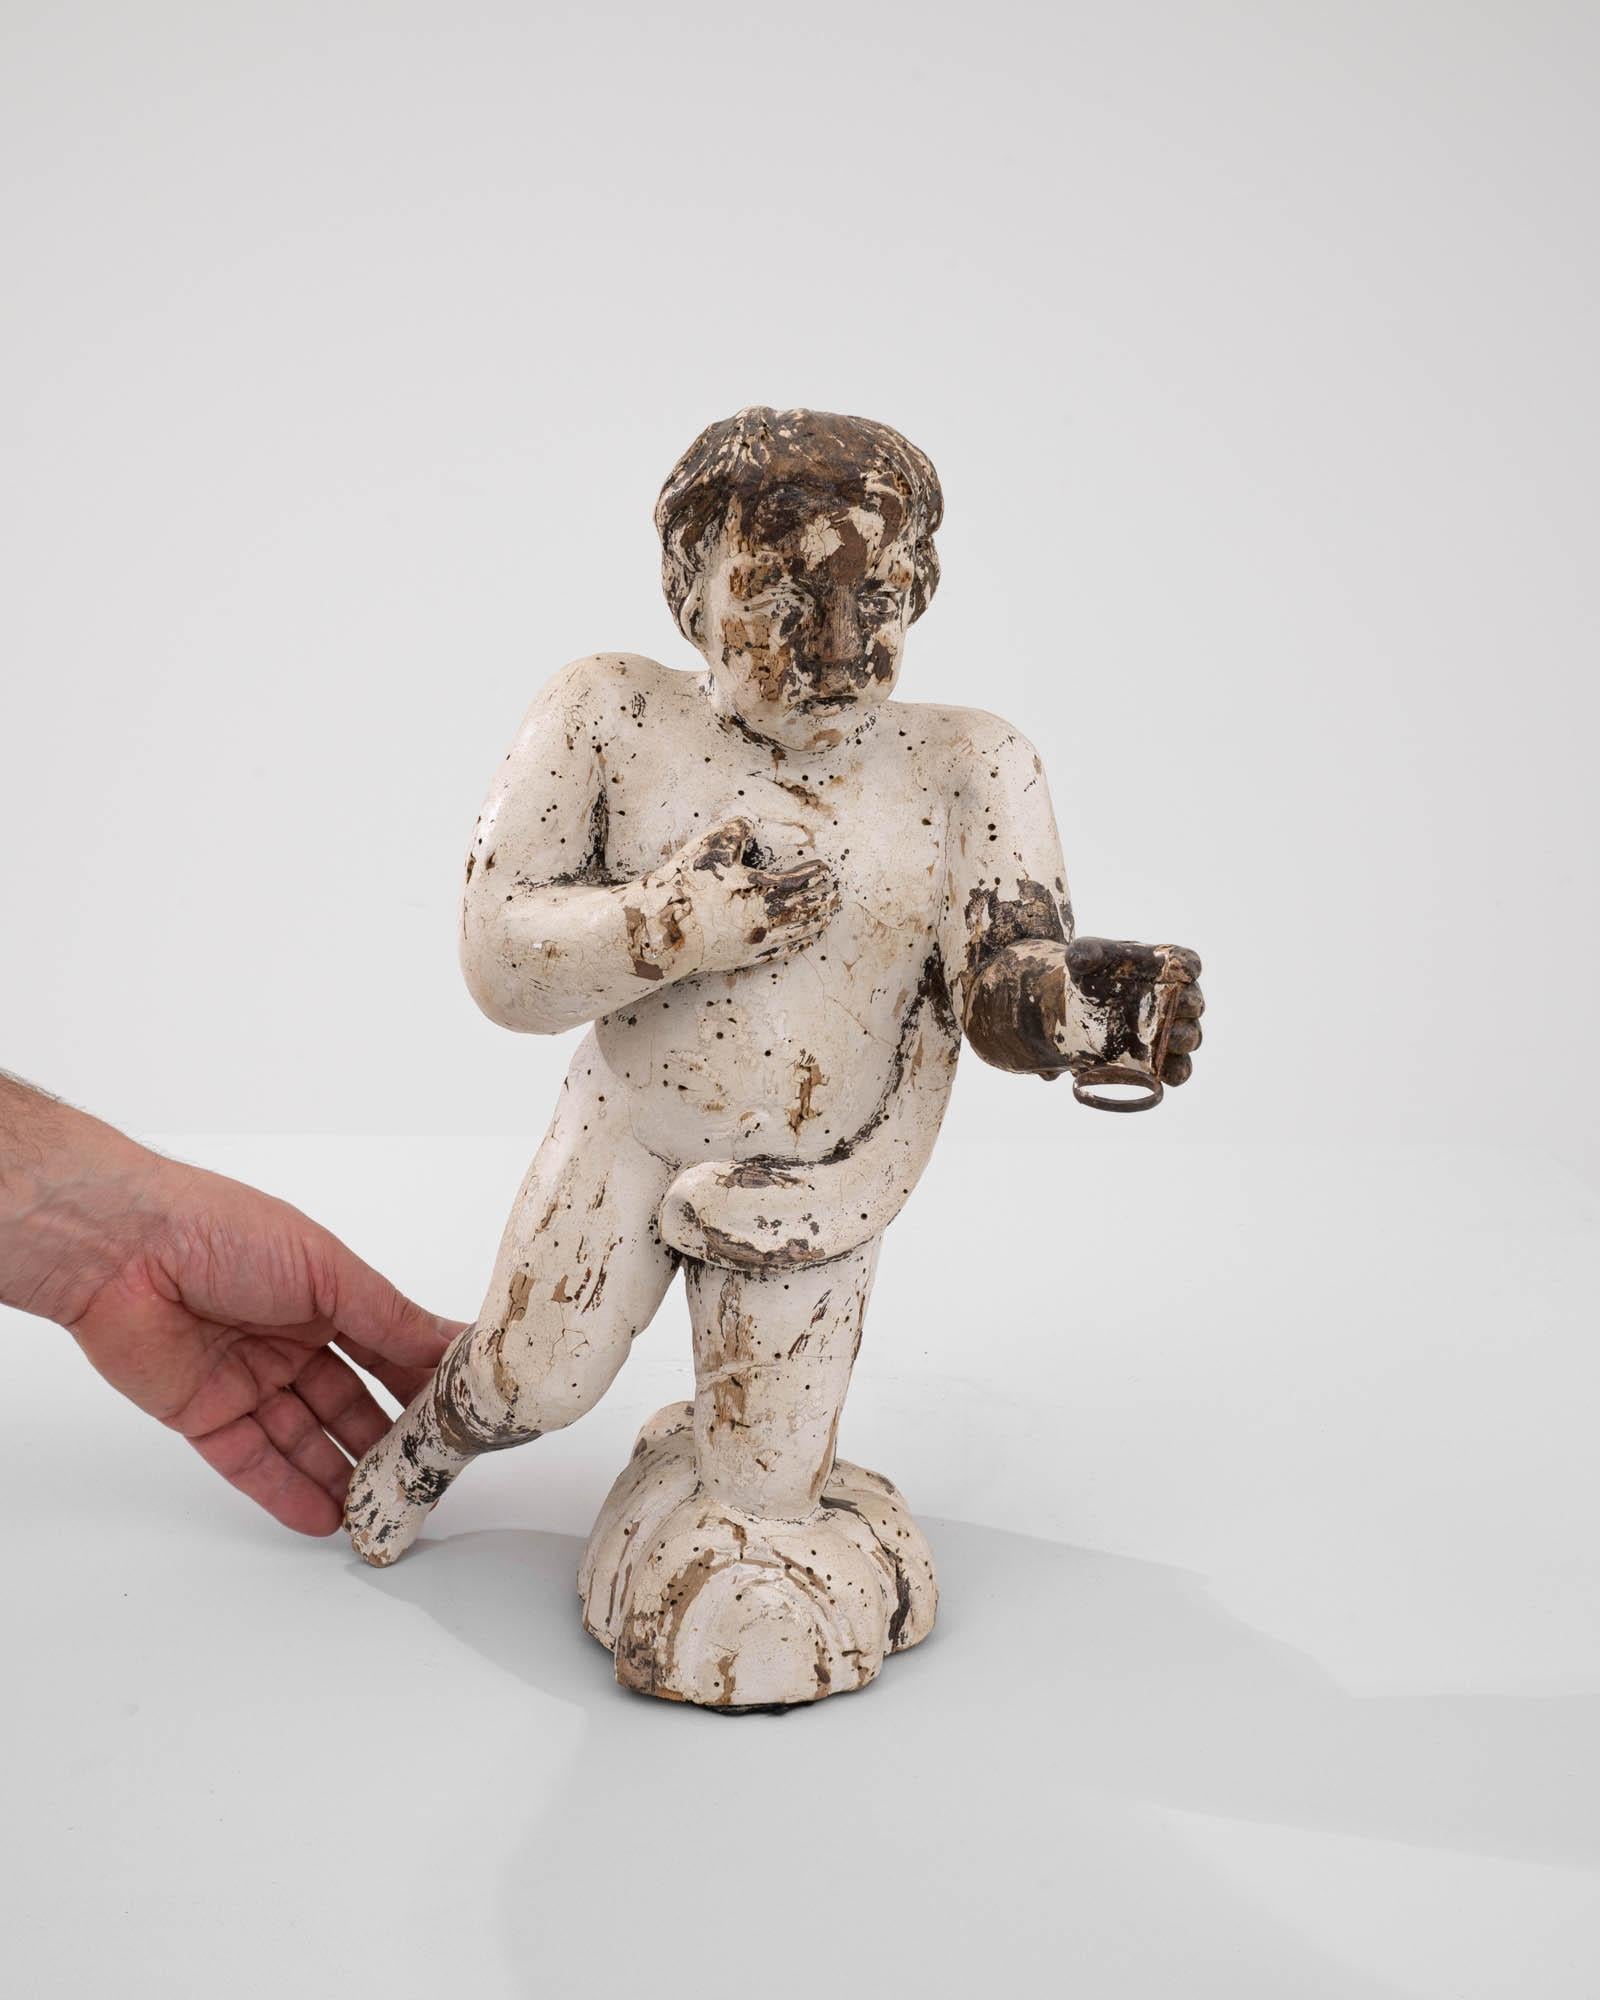 This 18th Century Italian Wooden Sculpture captivates with its rustic allure and storied past. Carved with a delicate yet masterful hand, it portrays the figure of a cherub, a timeless symbol of beauty and innocence. The sculpture's weathered